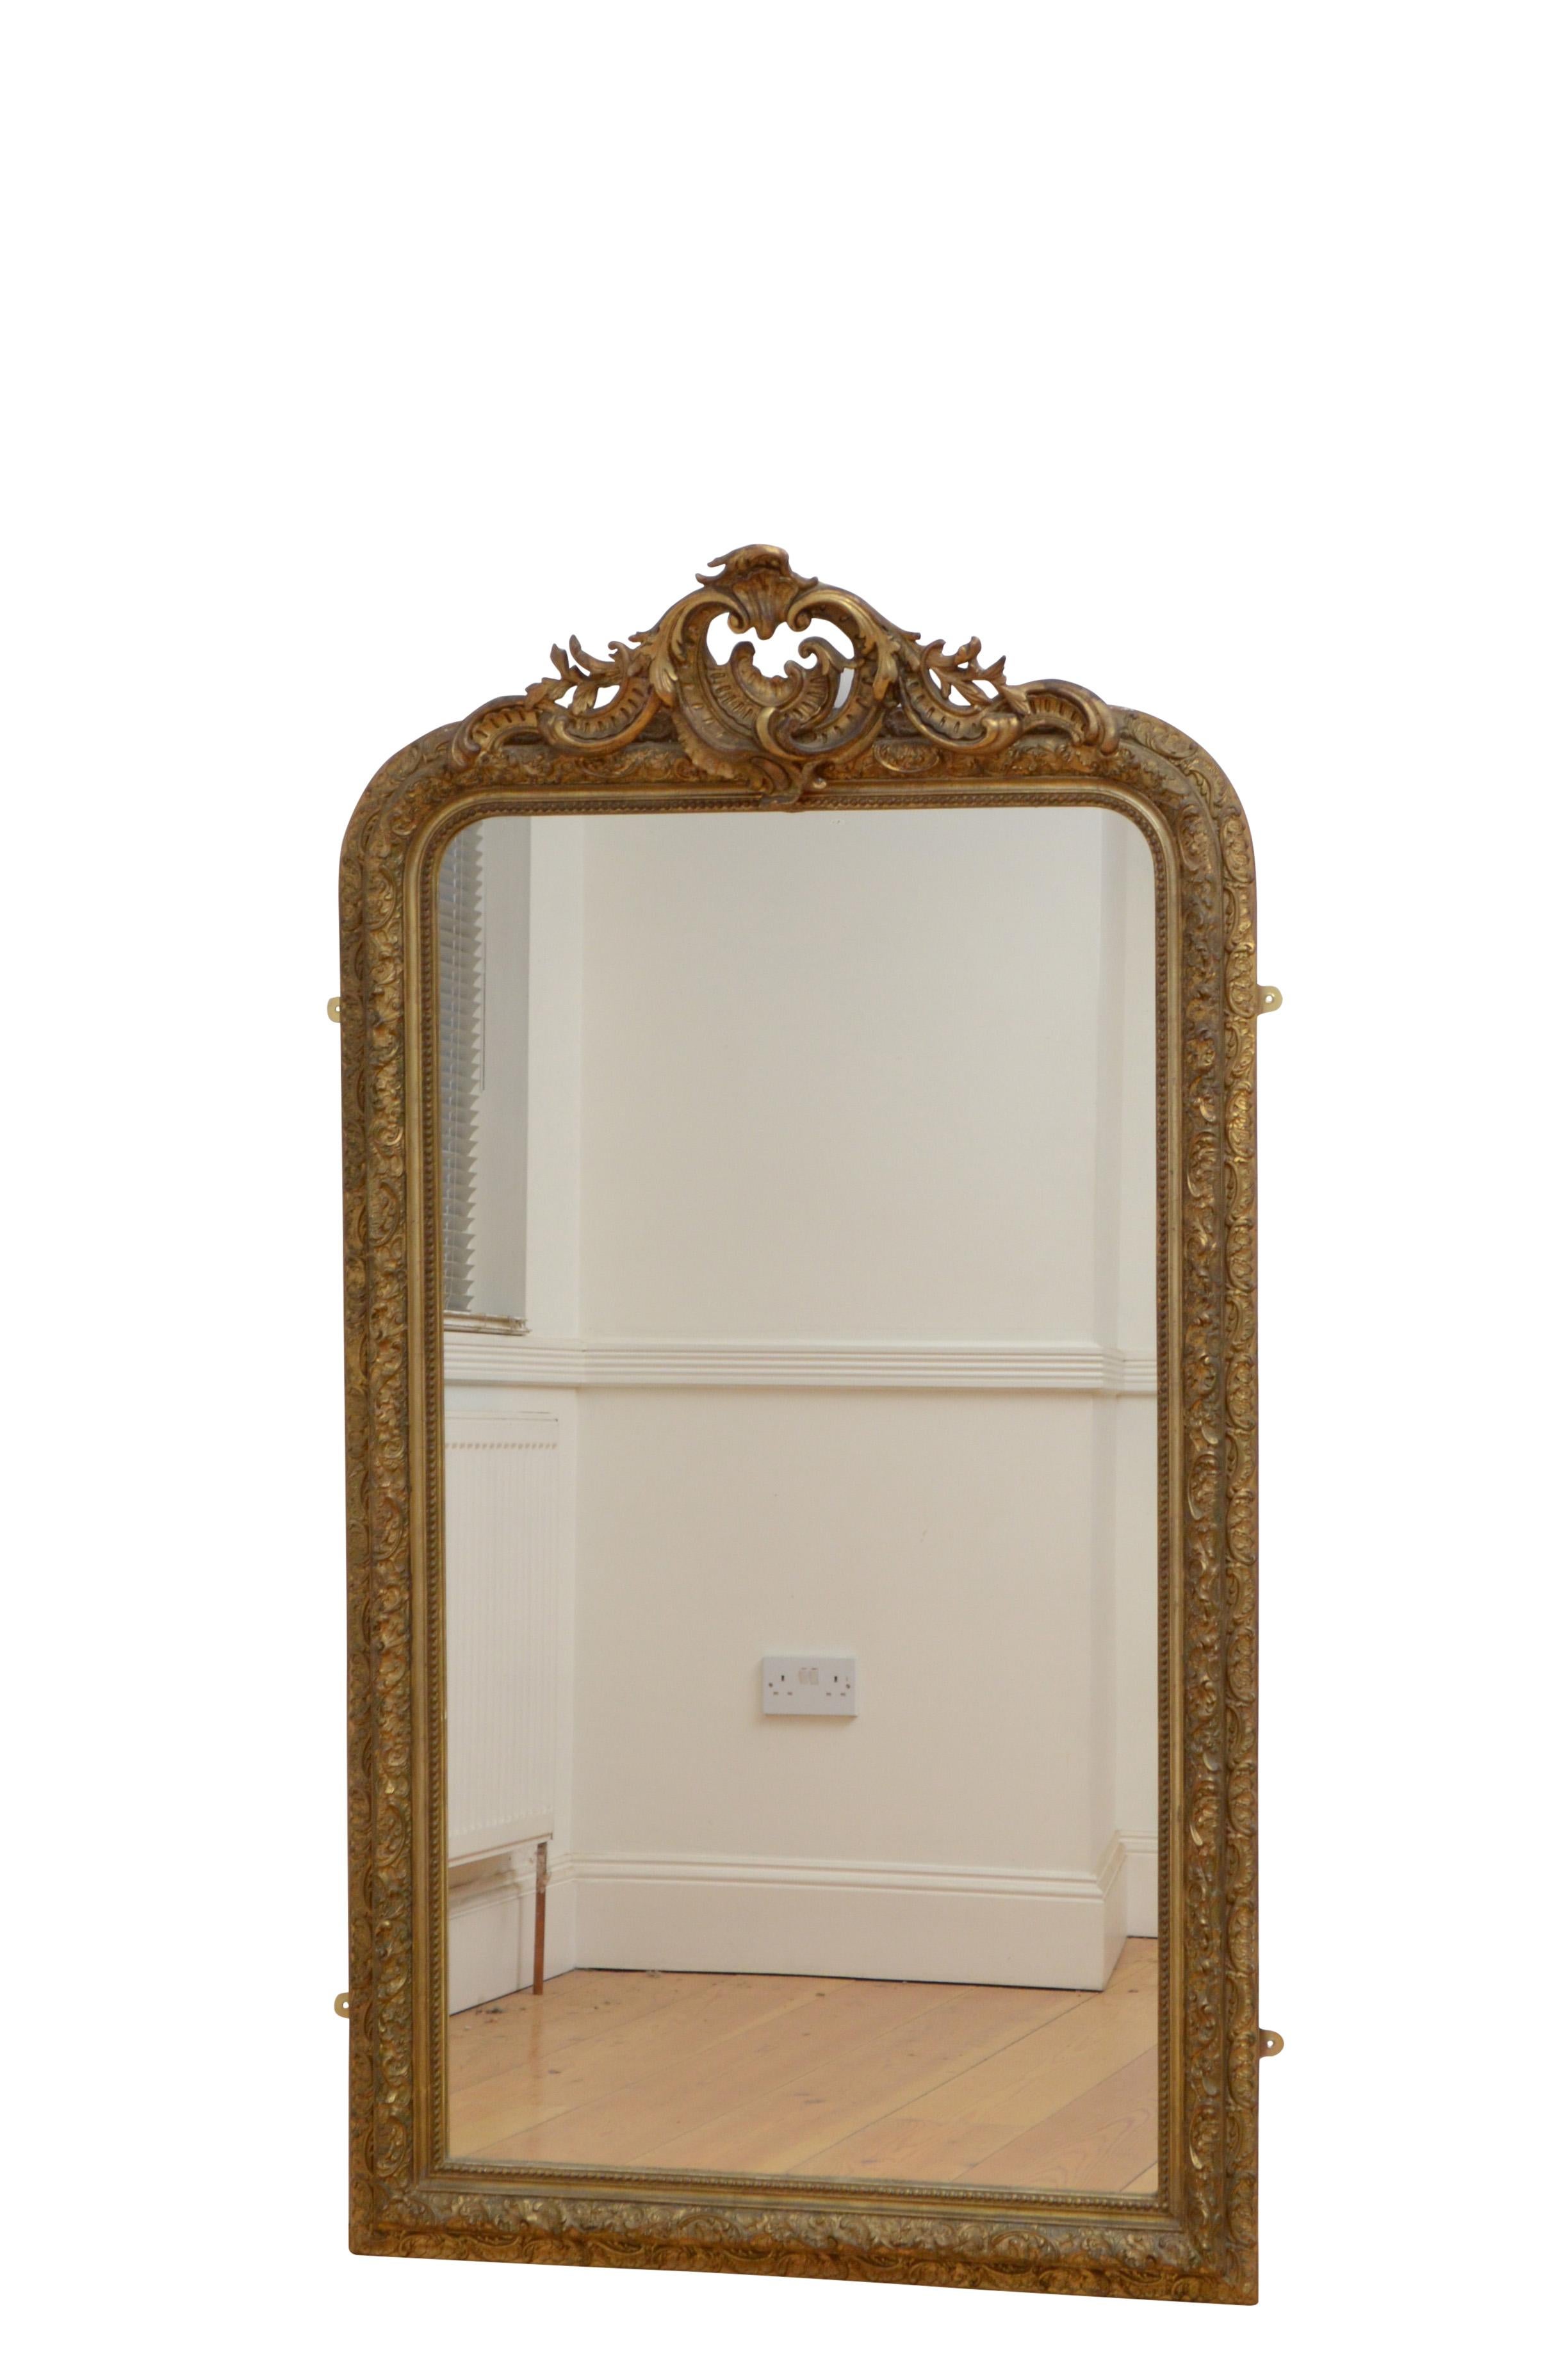 Attractive French gilded wall mirror, having original glass with minor foxing stamped 1898, in giltwood frame carved with ‘les pearls’ which symbolises strand of pearls, and leaf and floral motifs throughout, all adorned with an elaborately carved